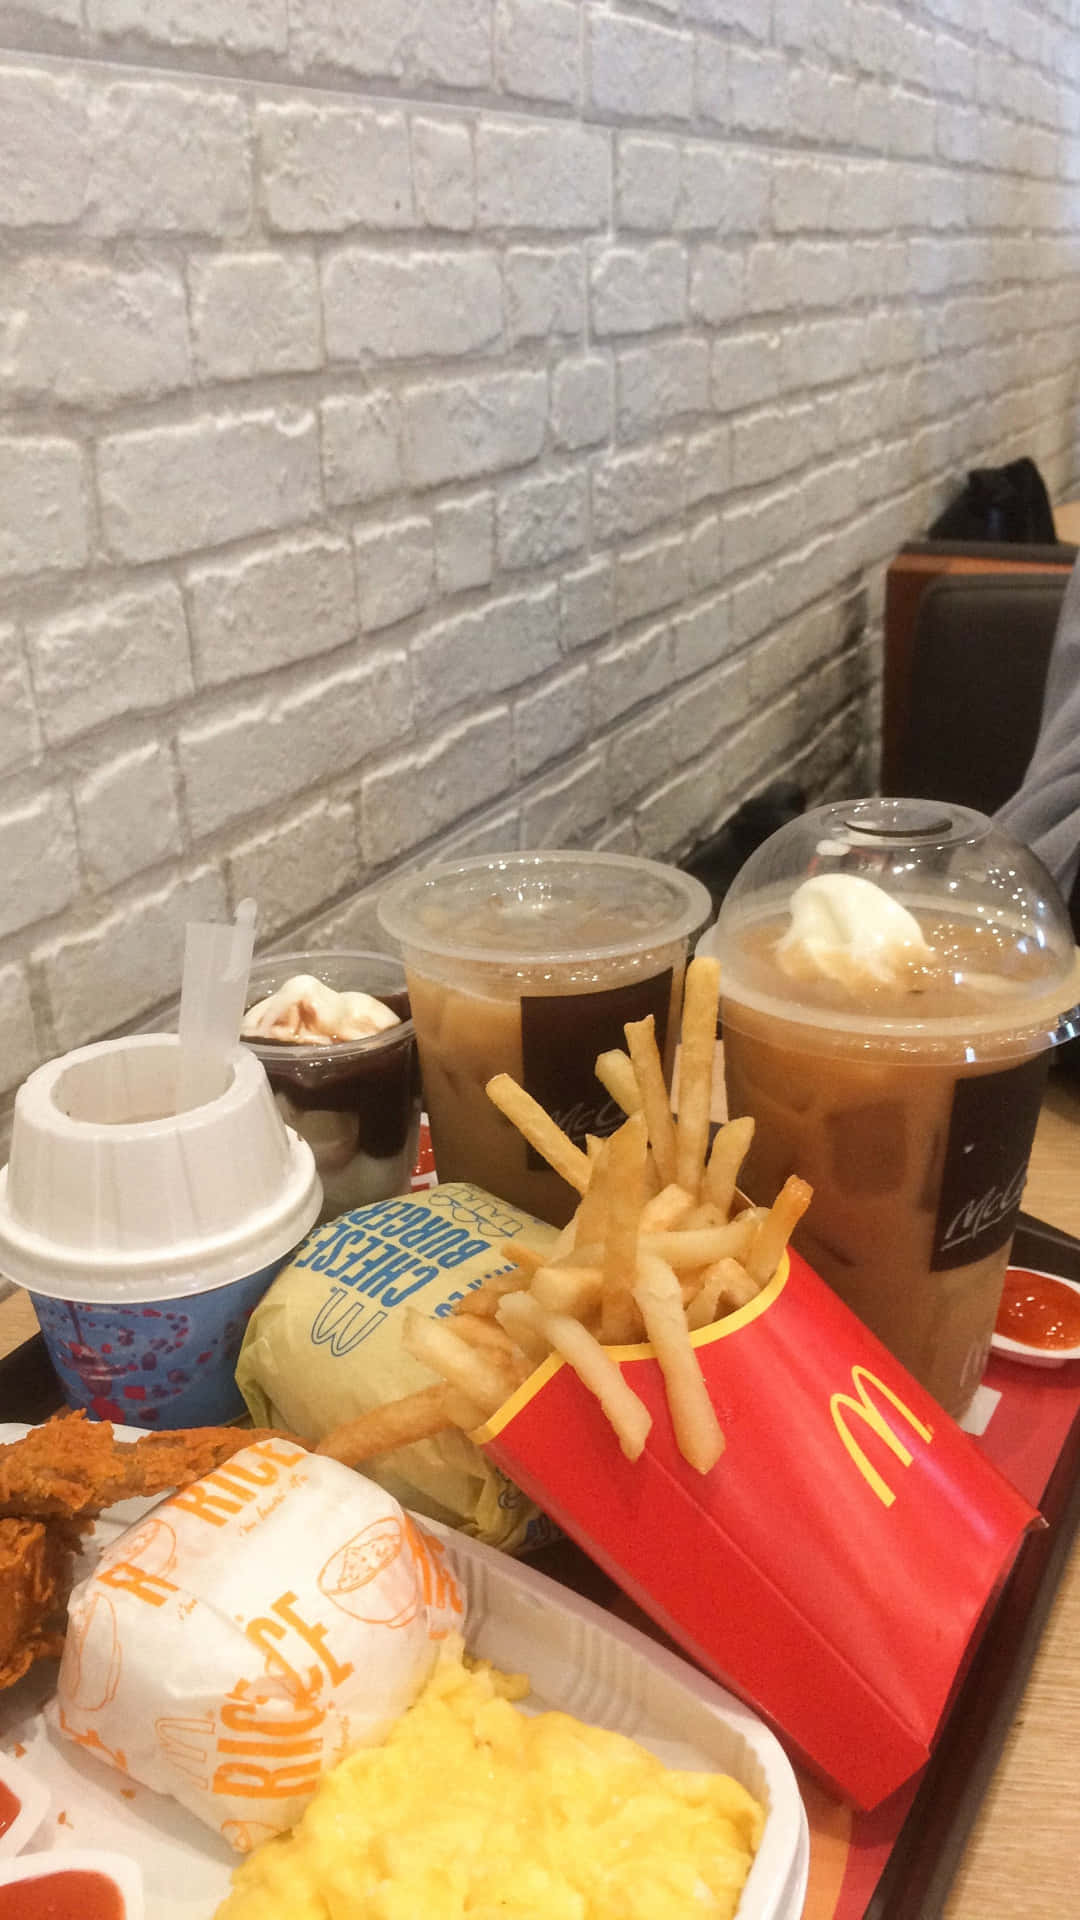 Mcdonalds Food Against Brick Wall Picture